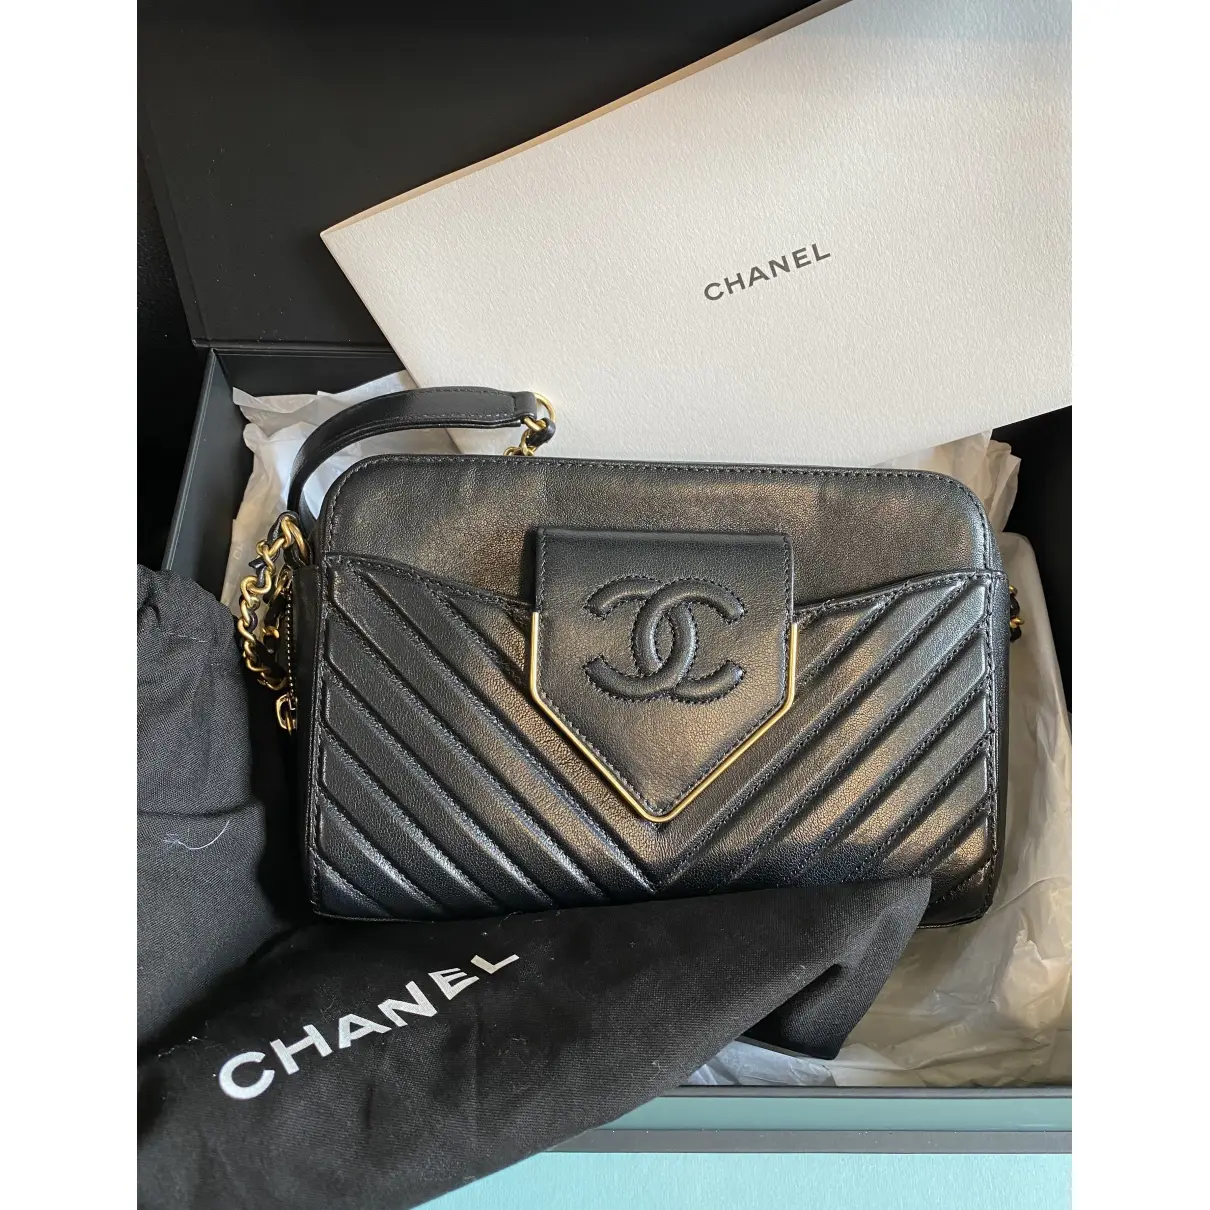 Camera leather bag Chanel